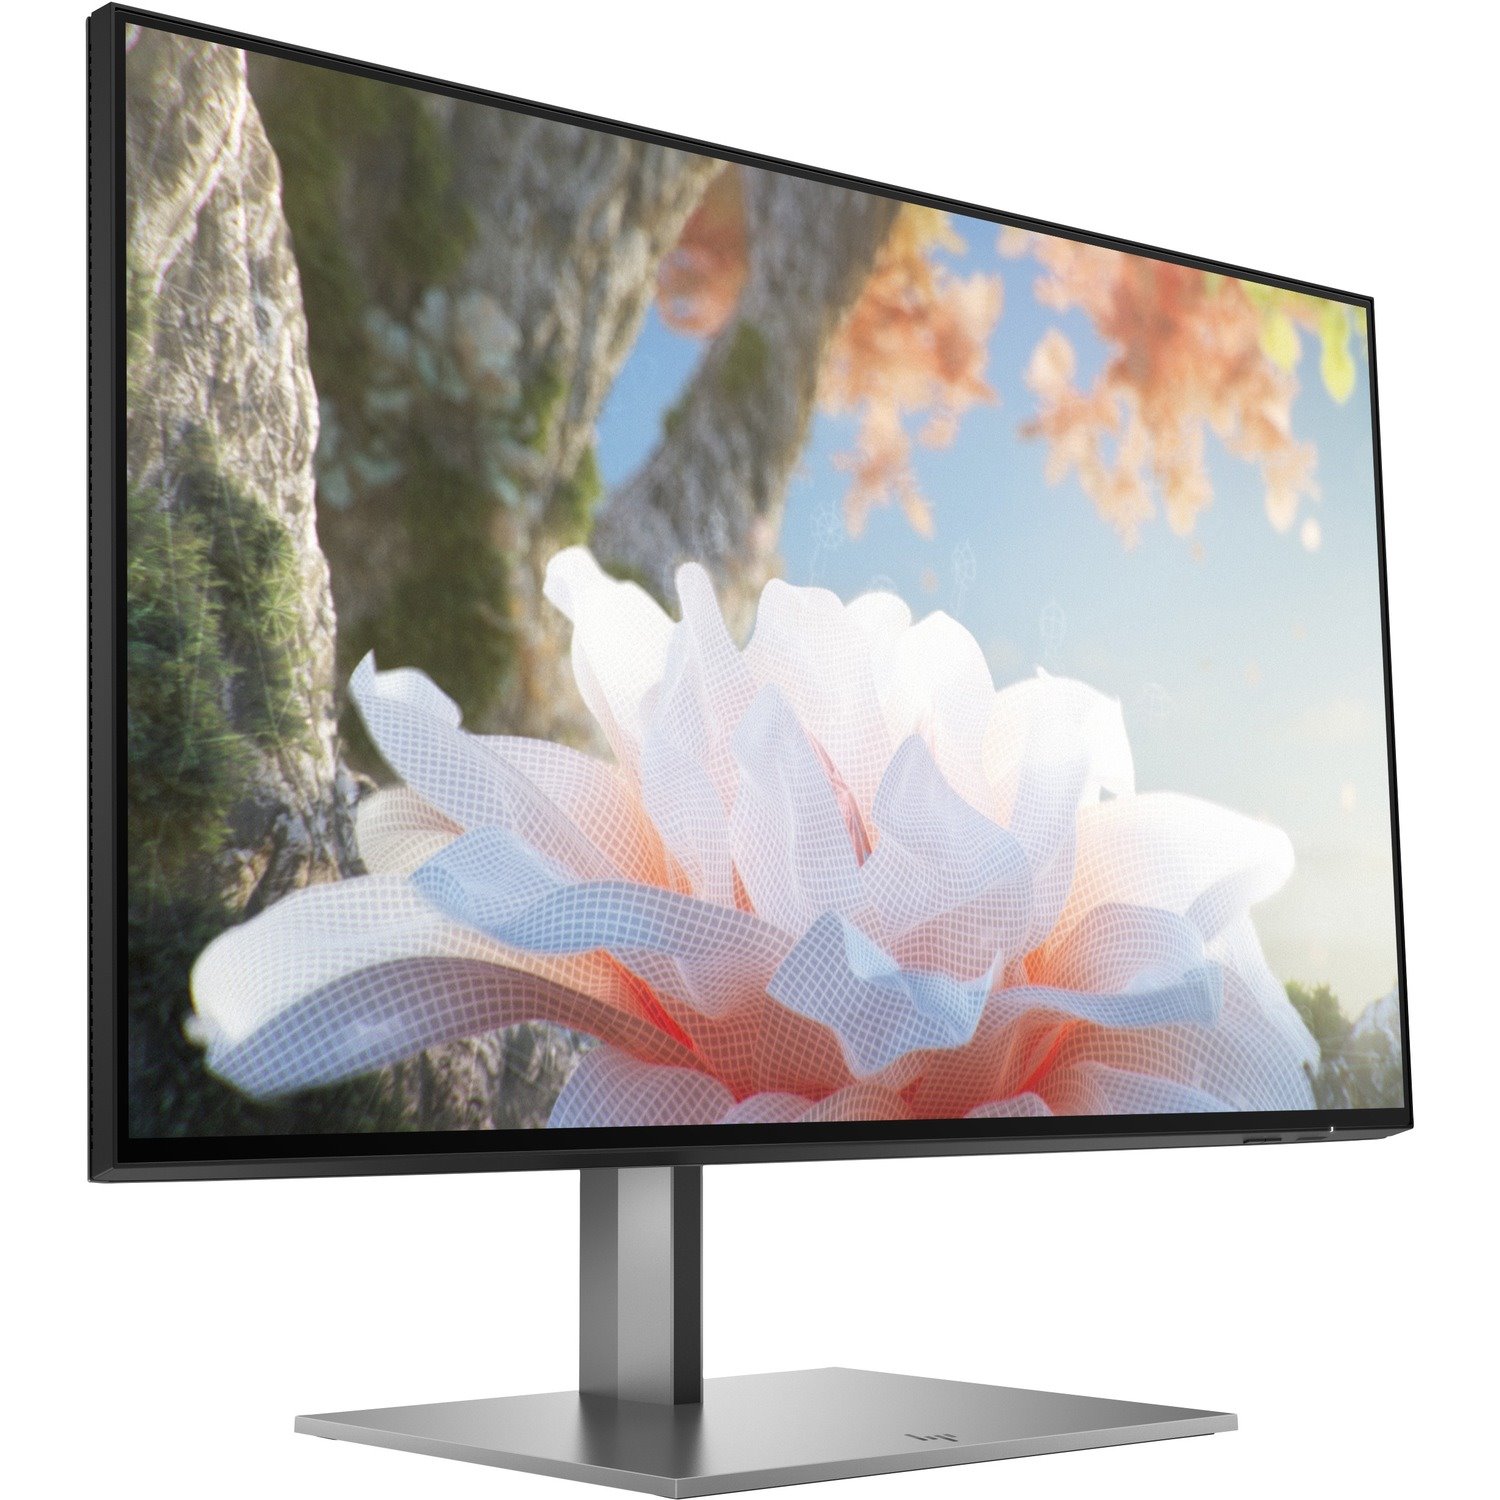 HP DreamColor Z27xs G3 27" 4K UHD LCD Monitor - 16:9